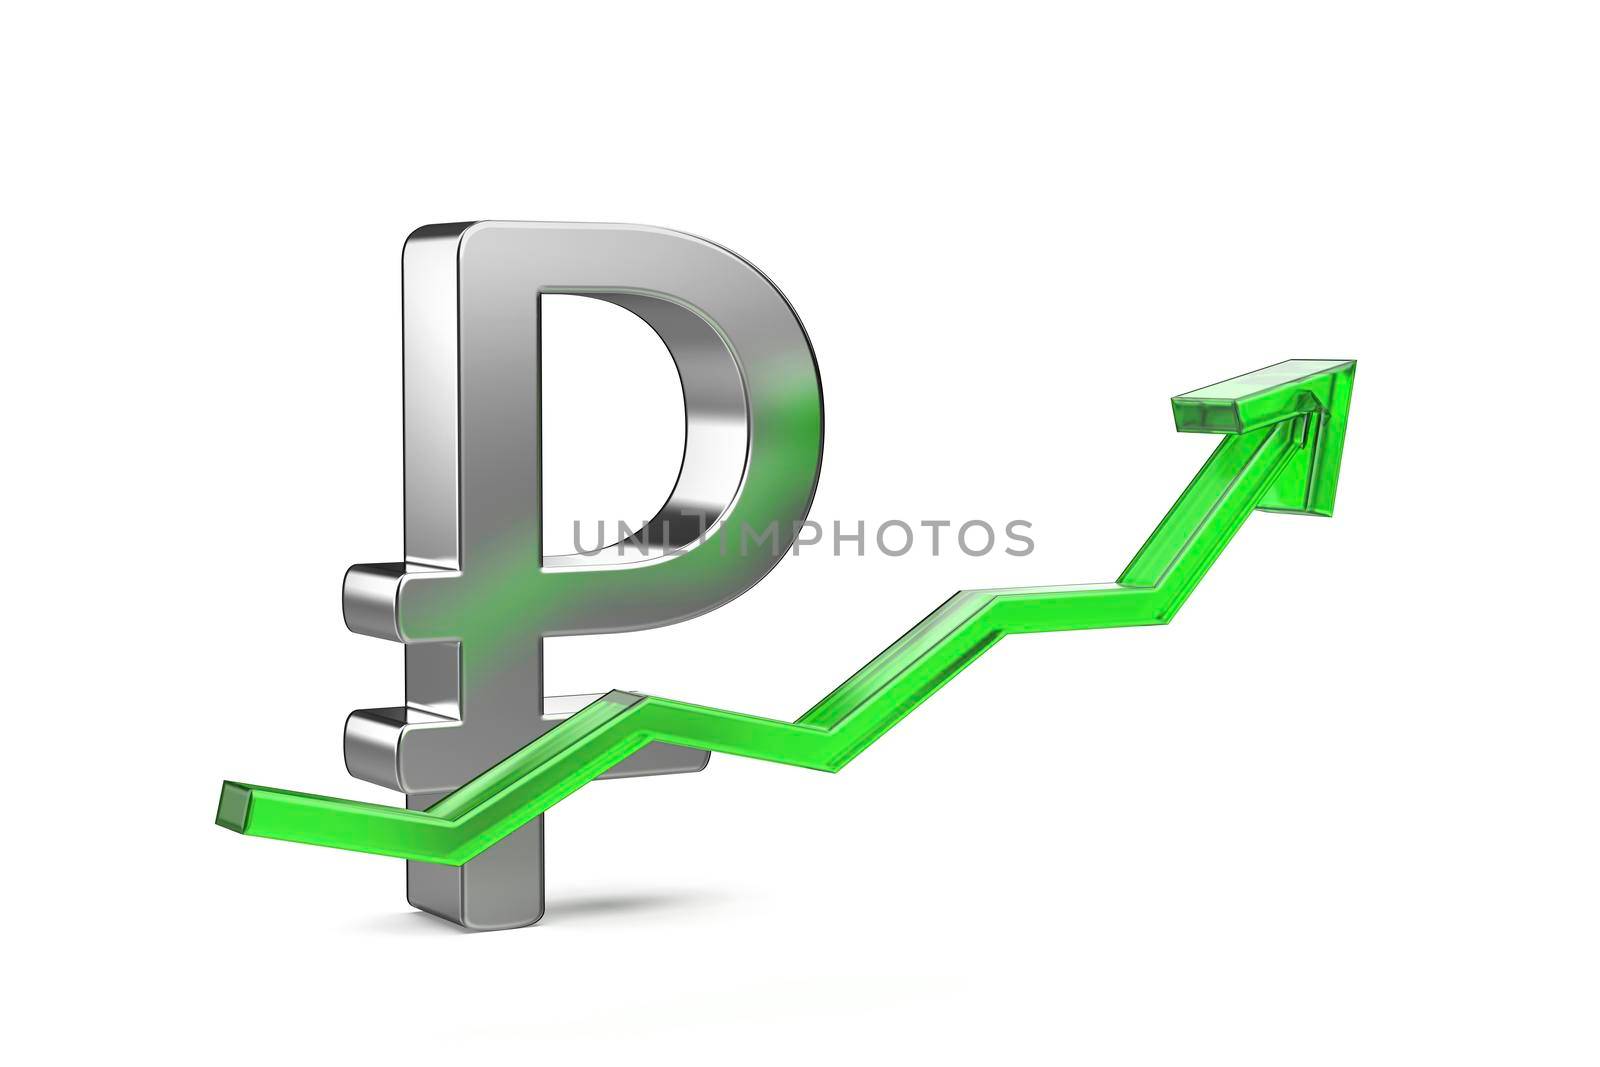 Increasing the value of Russian ruble currency, concept image